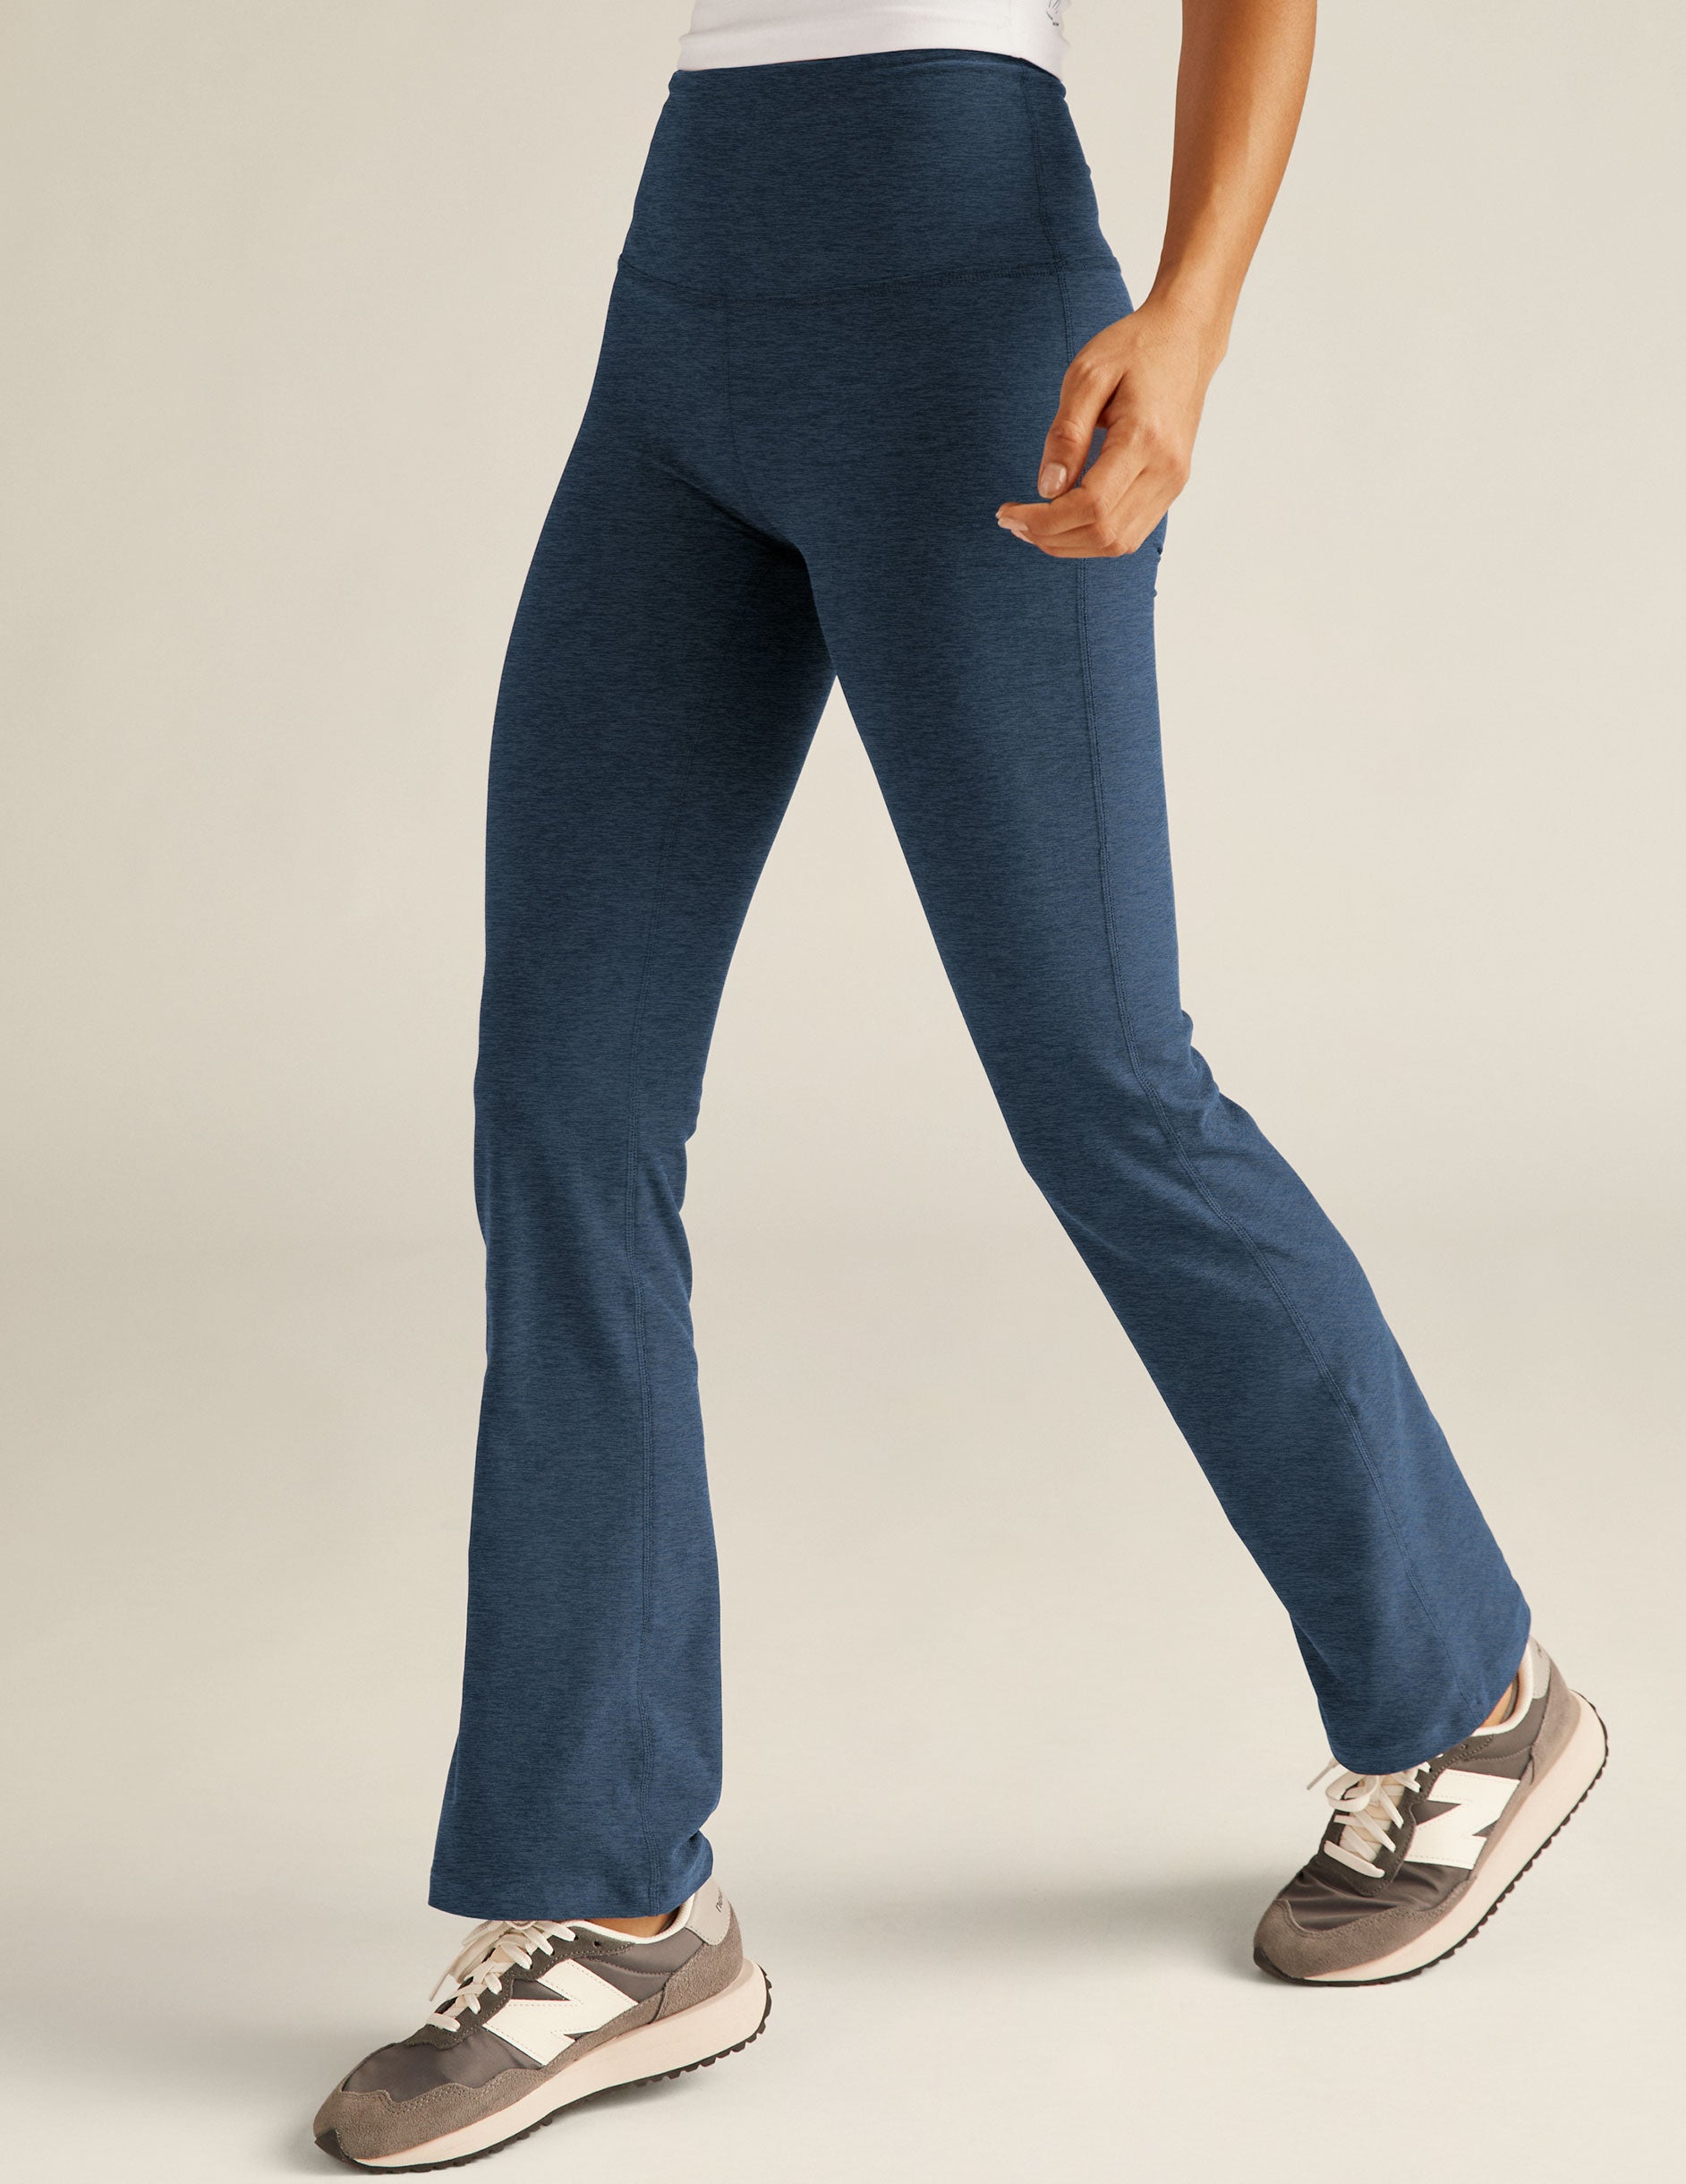 Beyond Yoga Spacedye High-Waisted Practice Pants  Anthropologie Japan -  Women's Clothing, Accessories & Home